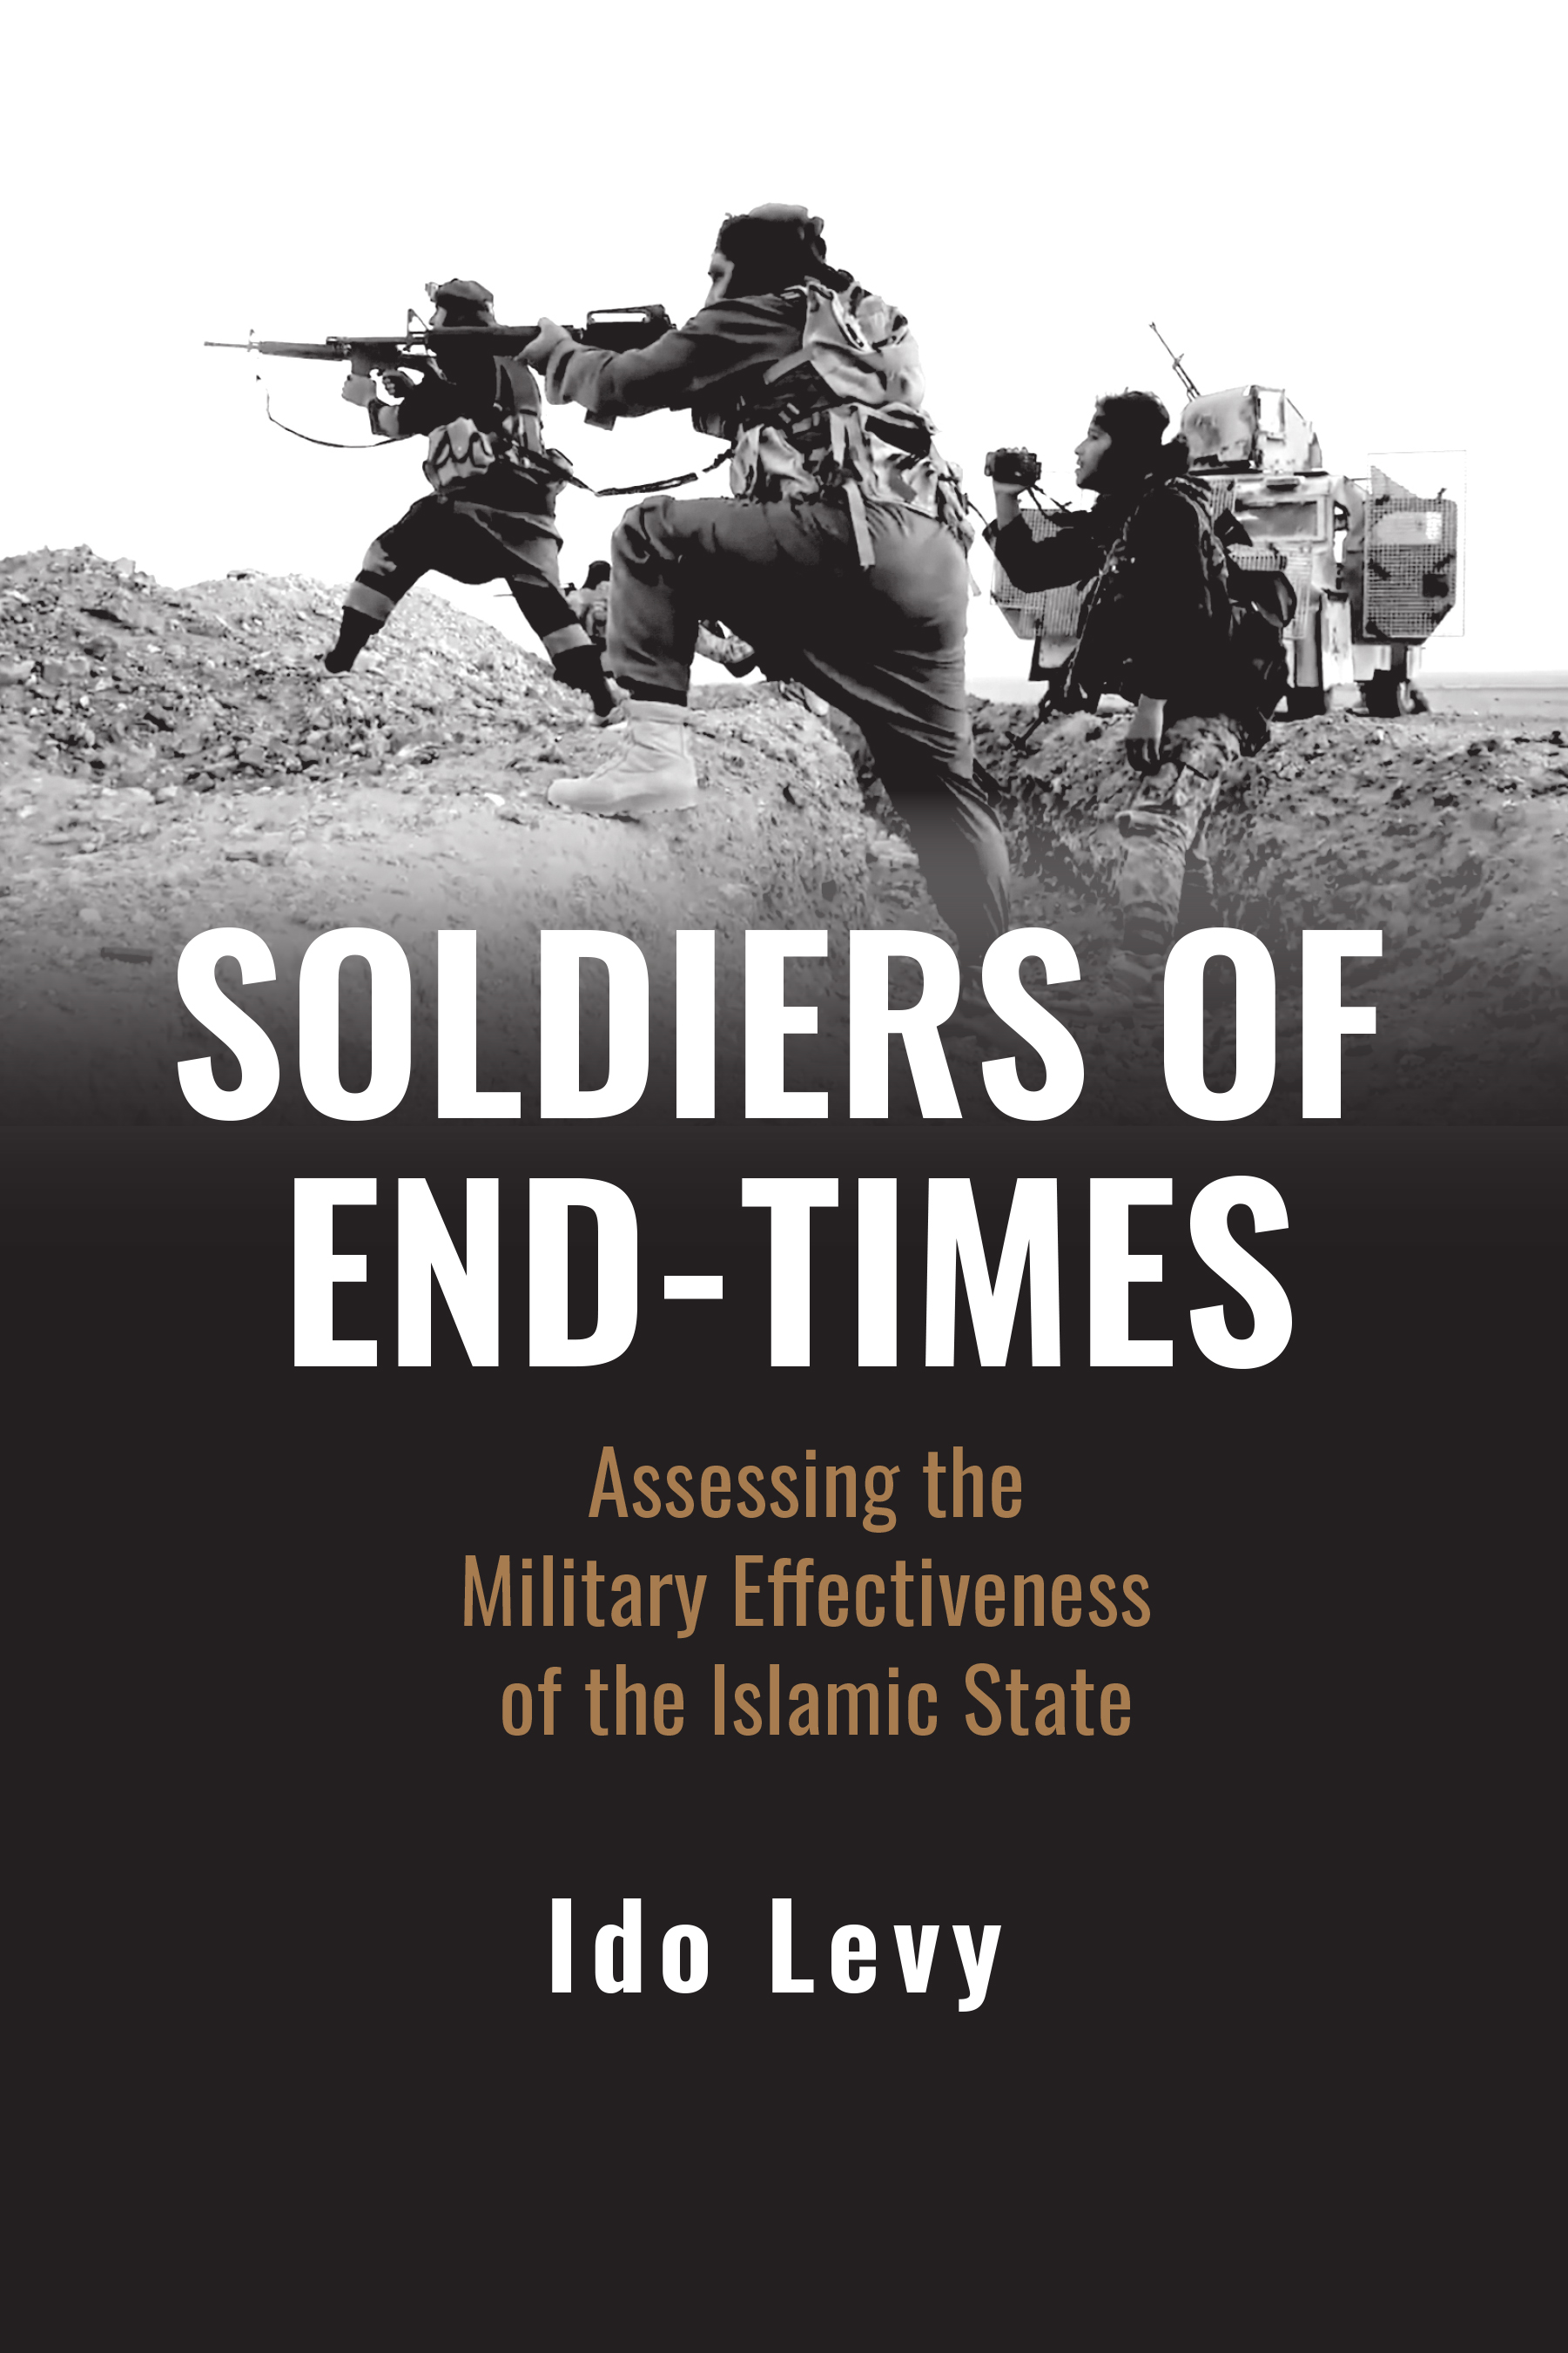 Soldiers of End-Times: Assessing the Military Effectiveness of the Islamic State